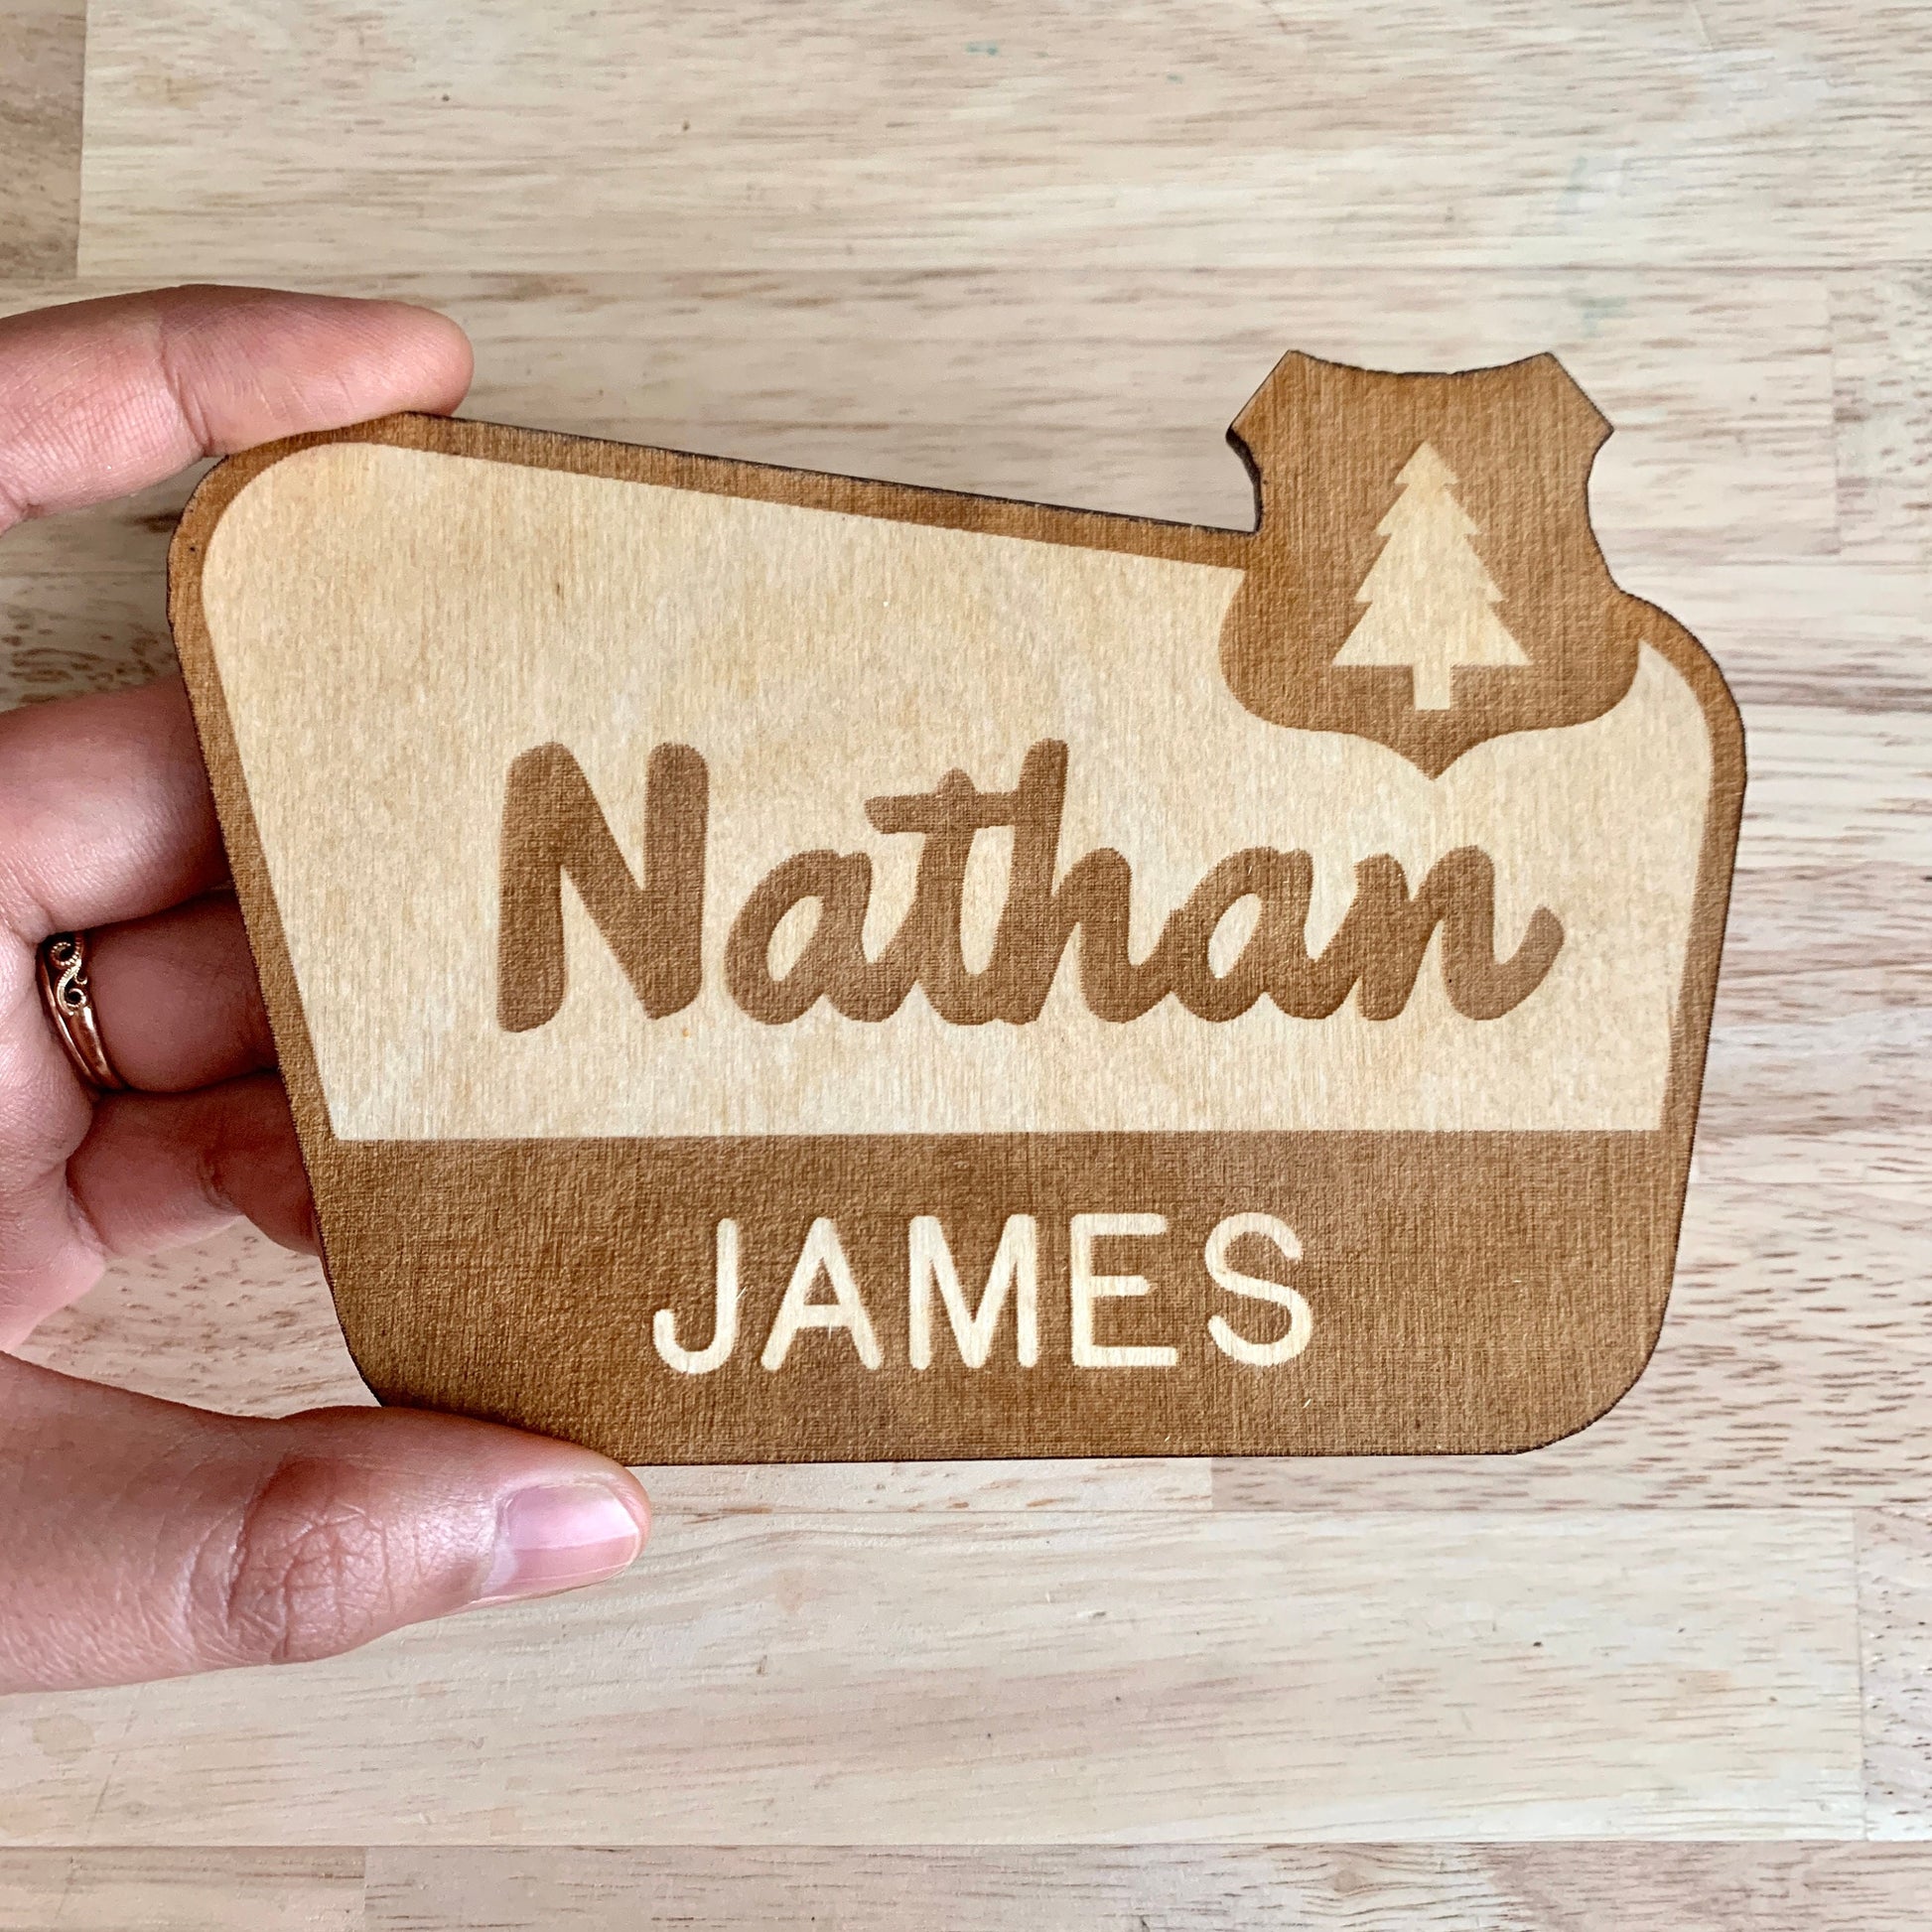 National Park Sign / Baby Name Sign / Last Name Sign / Wooden Name Sign / Baby Announcement Sign